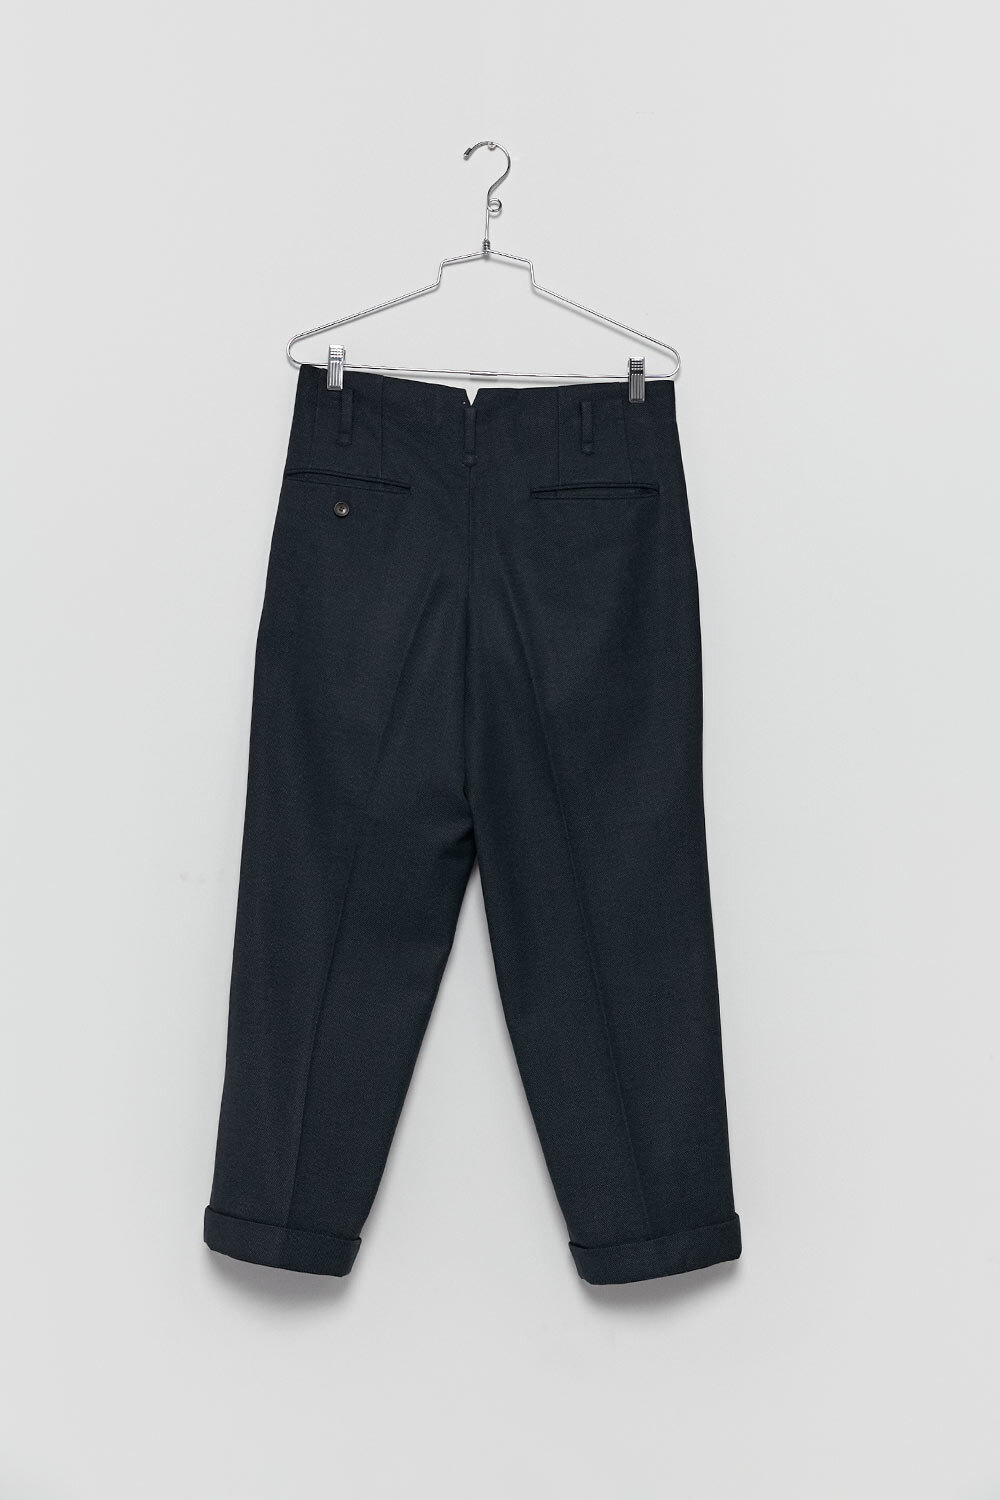 Imperial Japanese Repro Navy Blue Wool Trousers All Sizes 